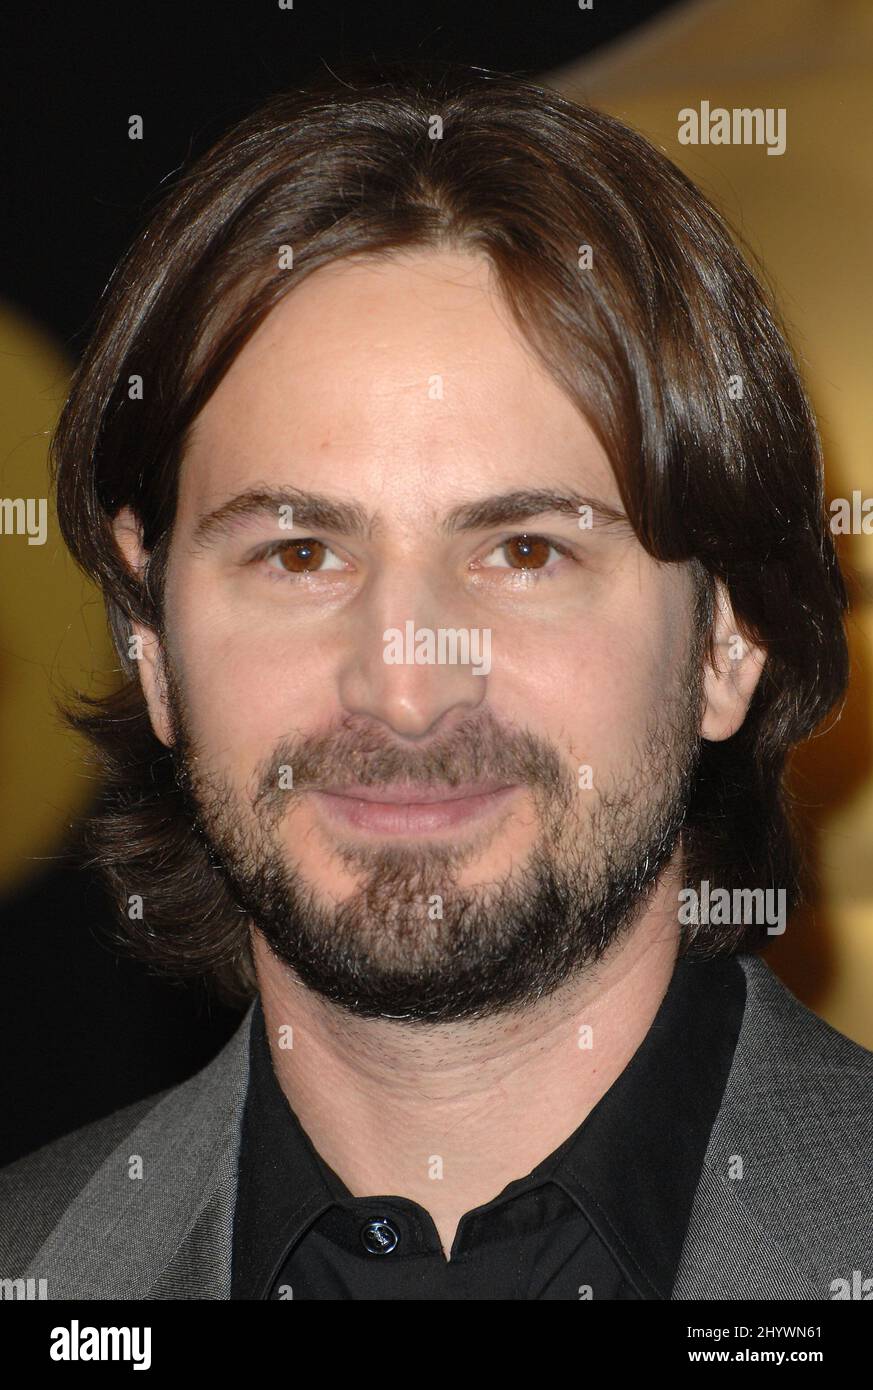 Mark Boal during the 82nd Academy Awards Nominee Luncheon Held at the Beverly Hilton Hotel, California Stock Photo